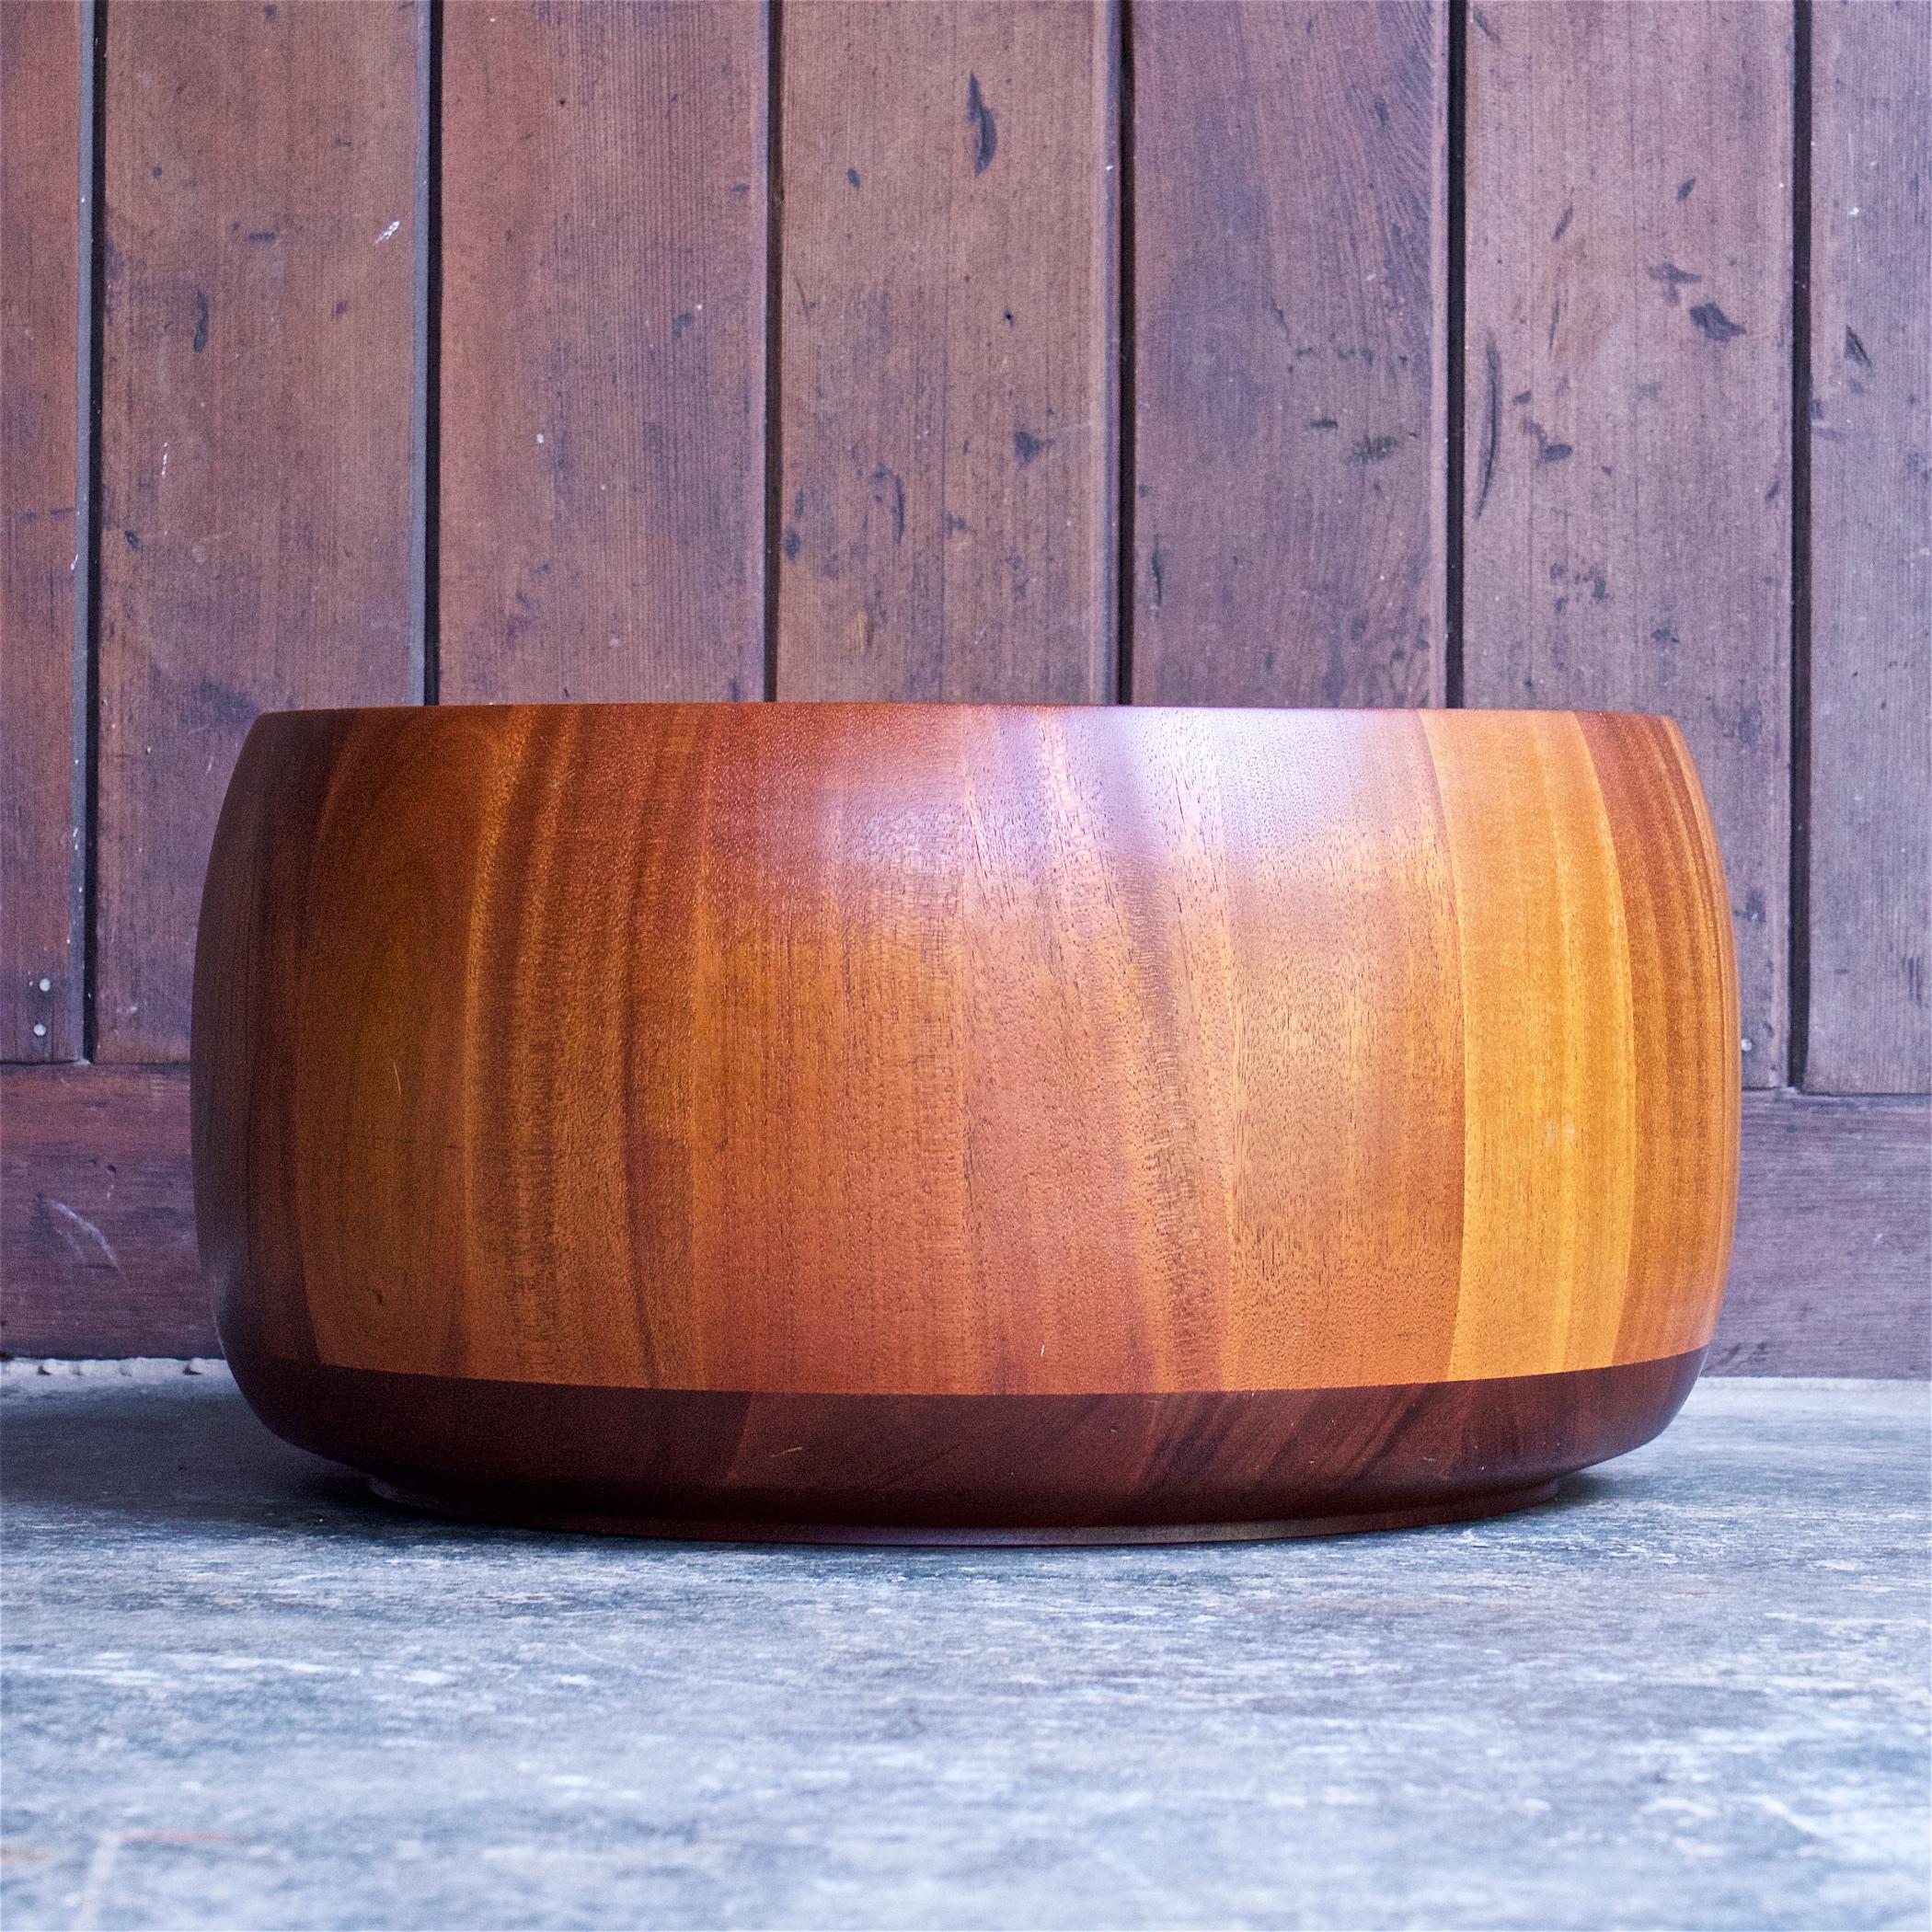 Beautifully constructed. A massive staved mahogany wood bowl, barrel, or planter. Condition is fair because there are 2 big dents to the rim, pictured.

Signed, John Crouse 1979 Wolcott NY.